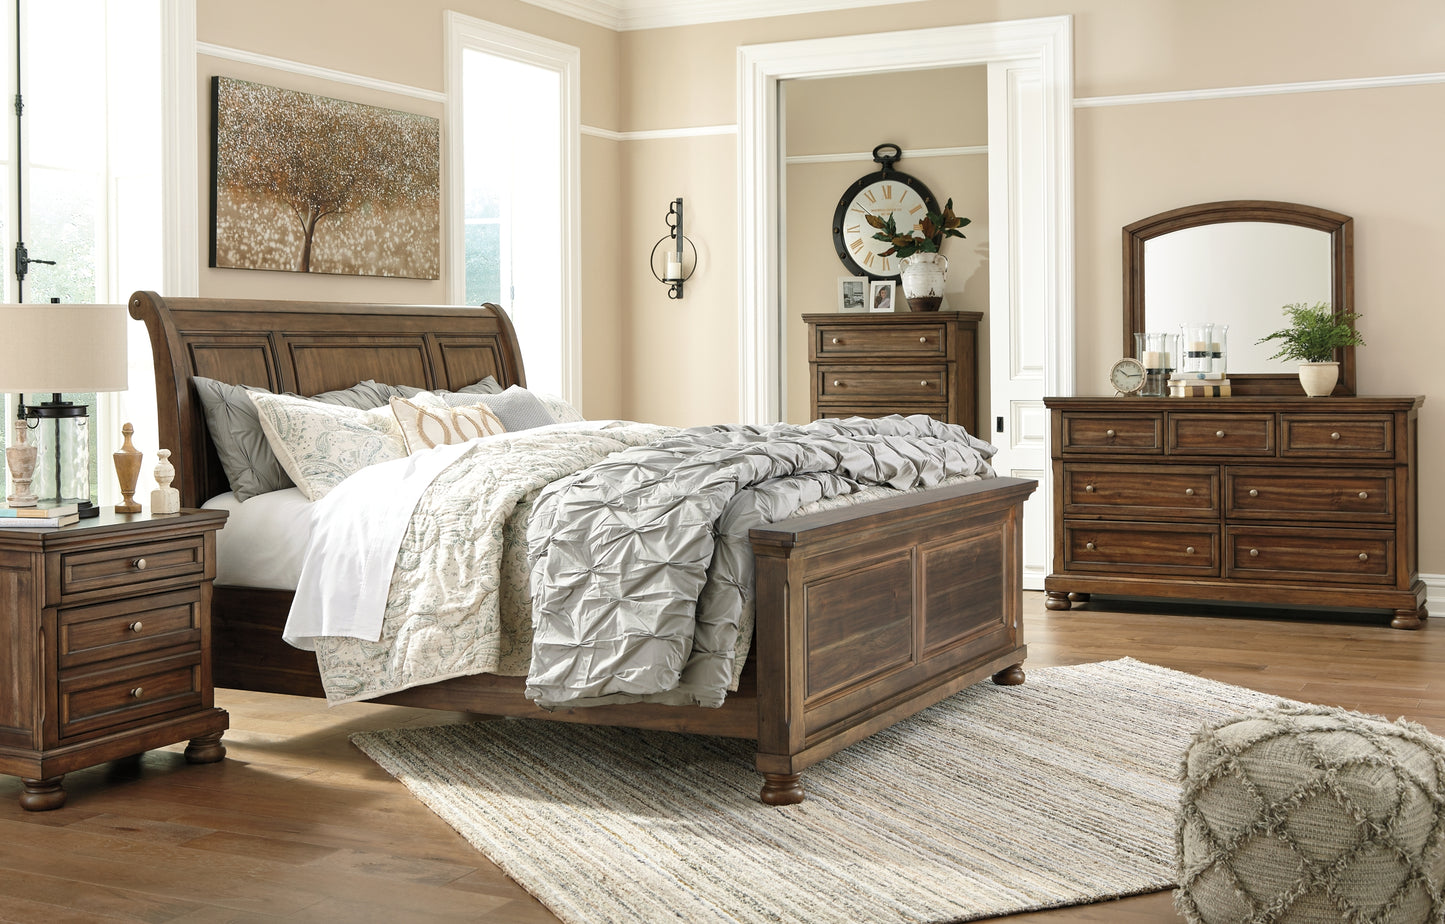 Flynnter Queen Panel Bed with 2 Storage Drawers with Mirrored Dresser, Chest and Nightstand Wilson Furniture (OH)  in Bridgeport, Ohio. Serving Bridgeport, Yorkville, Bellaire, & Avondale